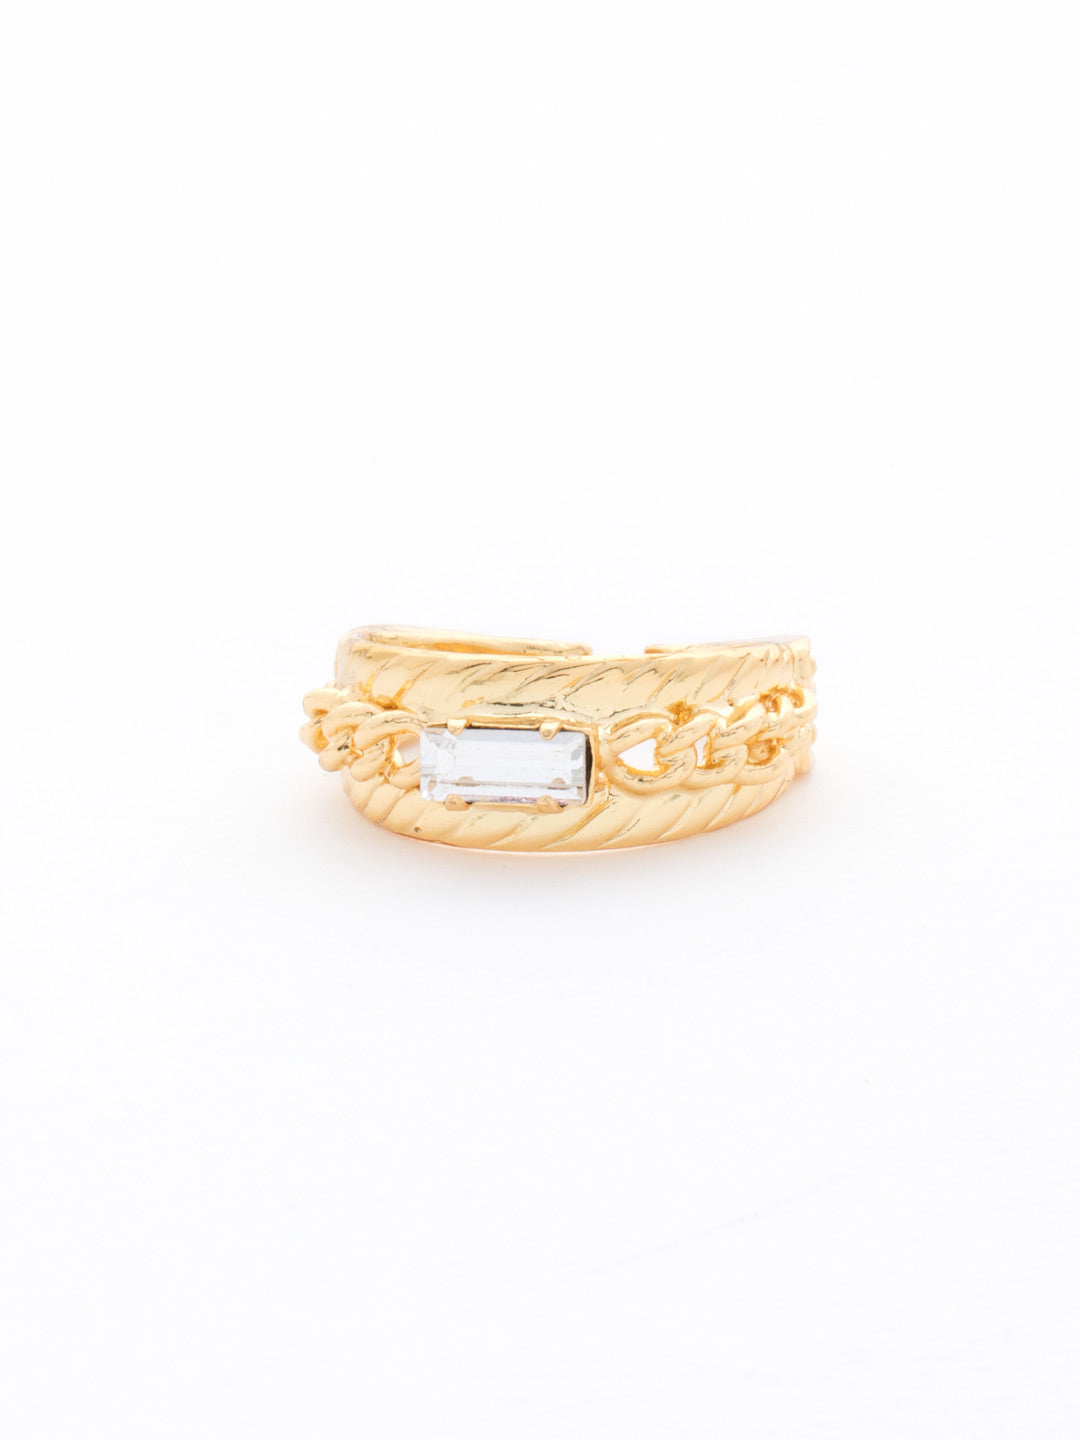 Petite Braided Baguette Ring - RCT28BGCRY - <p>This stackable ring features a petite baguette crystal set between two braided bands, which is further accented by delicate, metal chain. From Sorrelli's Crystal collection in our Bright Gold-tone finish.</p>